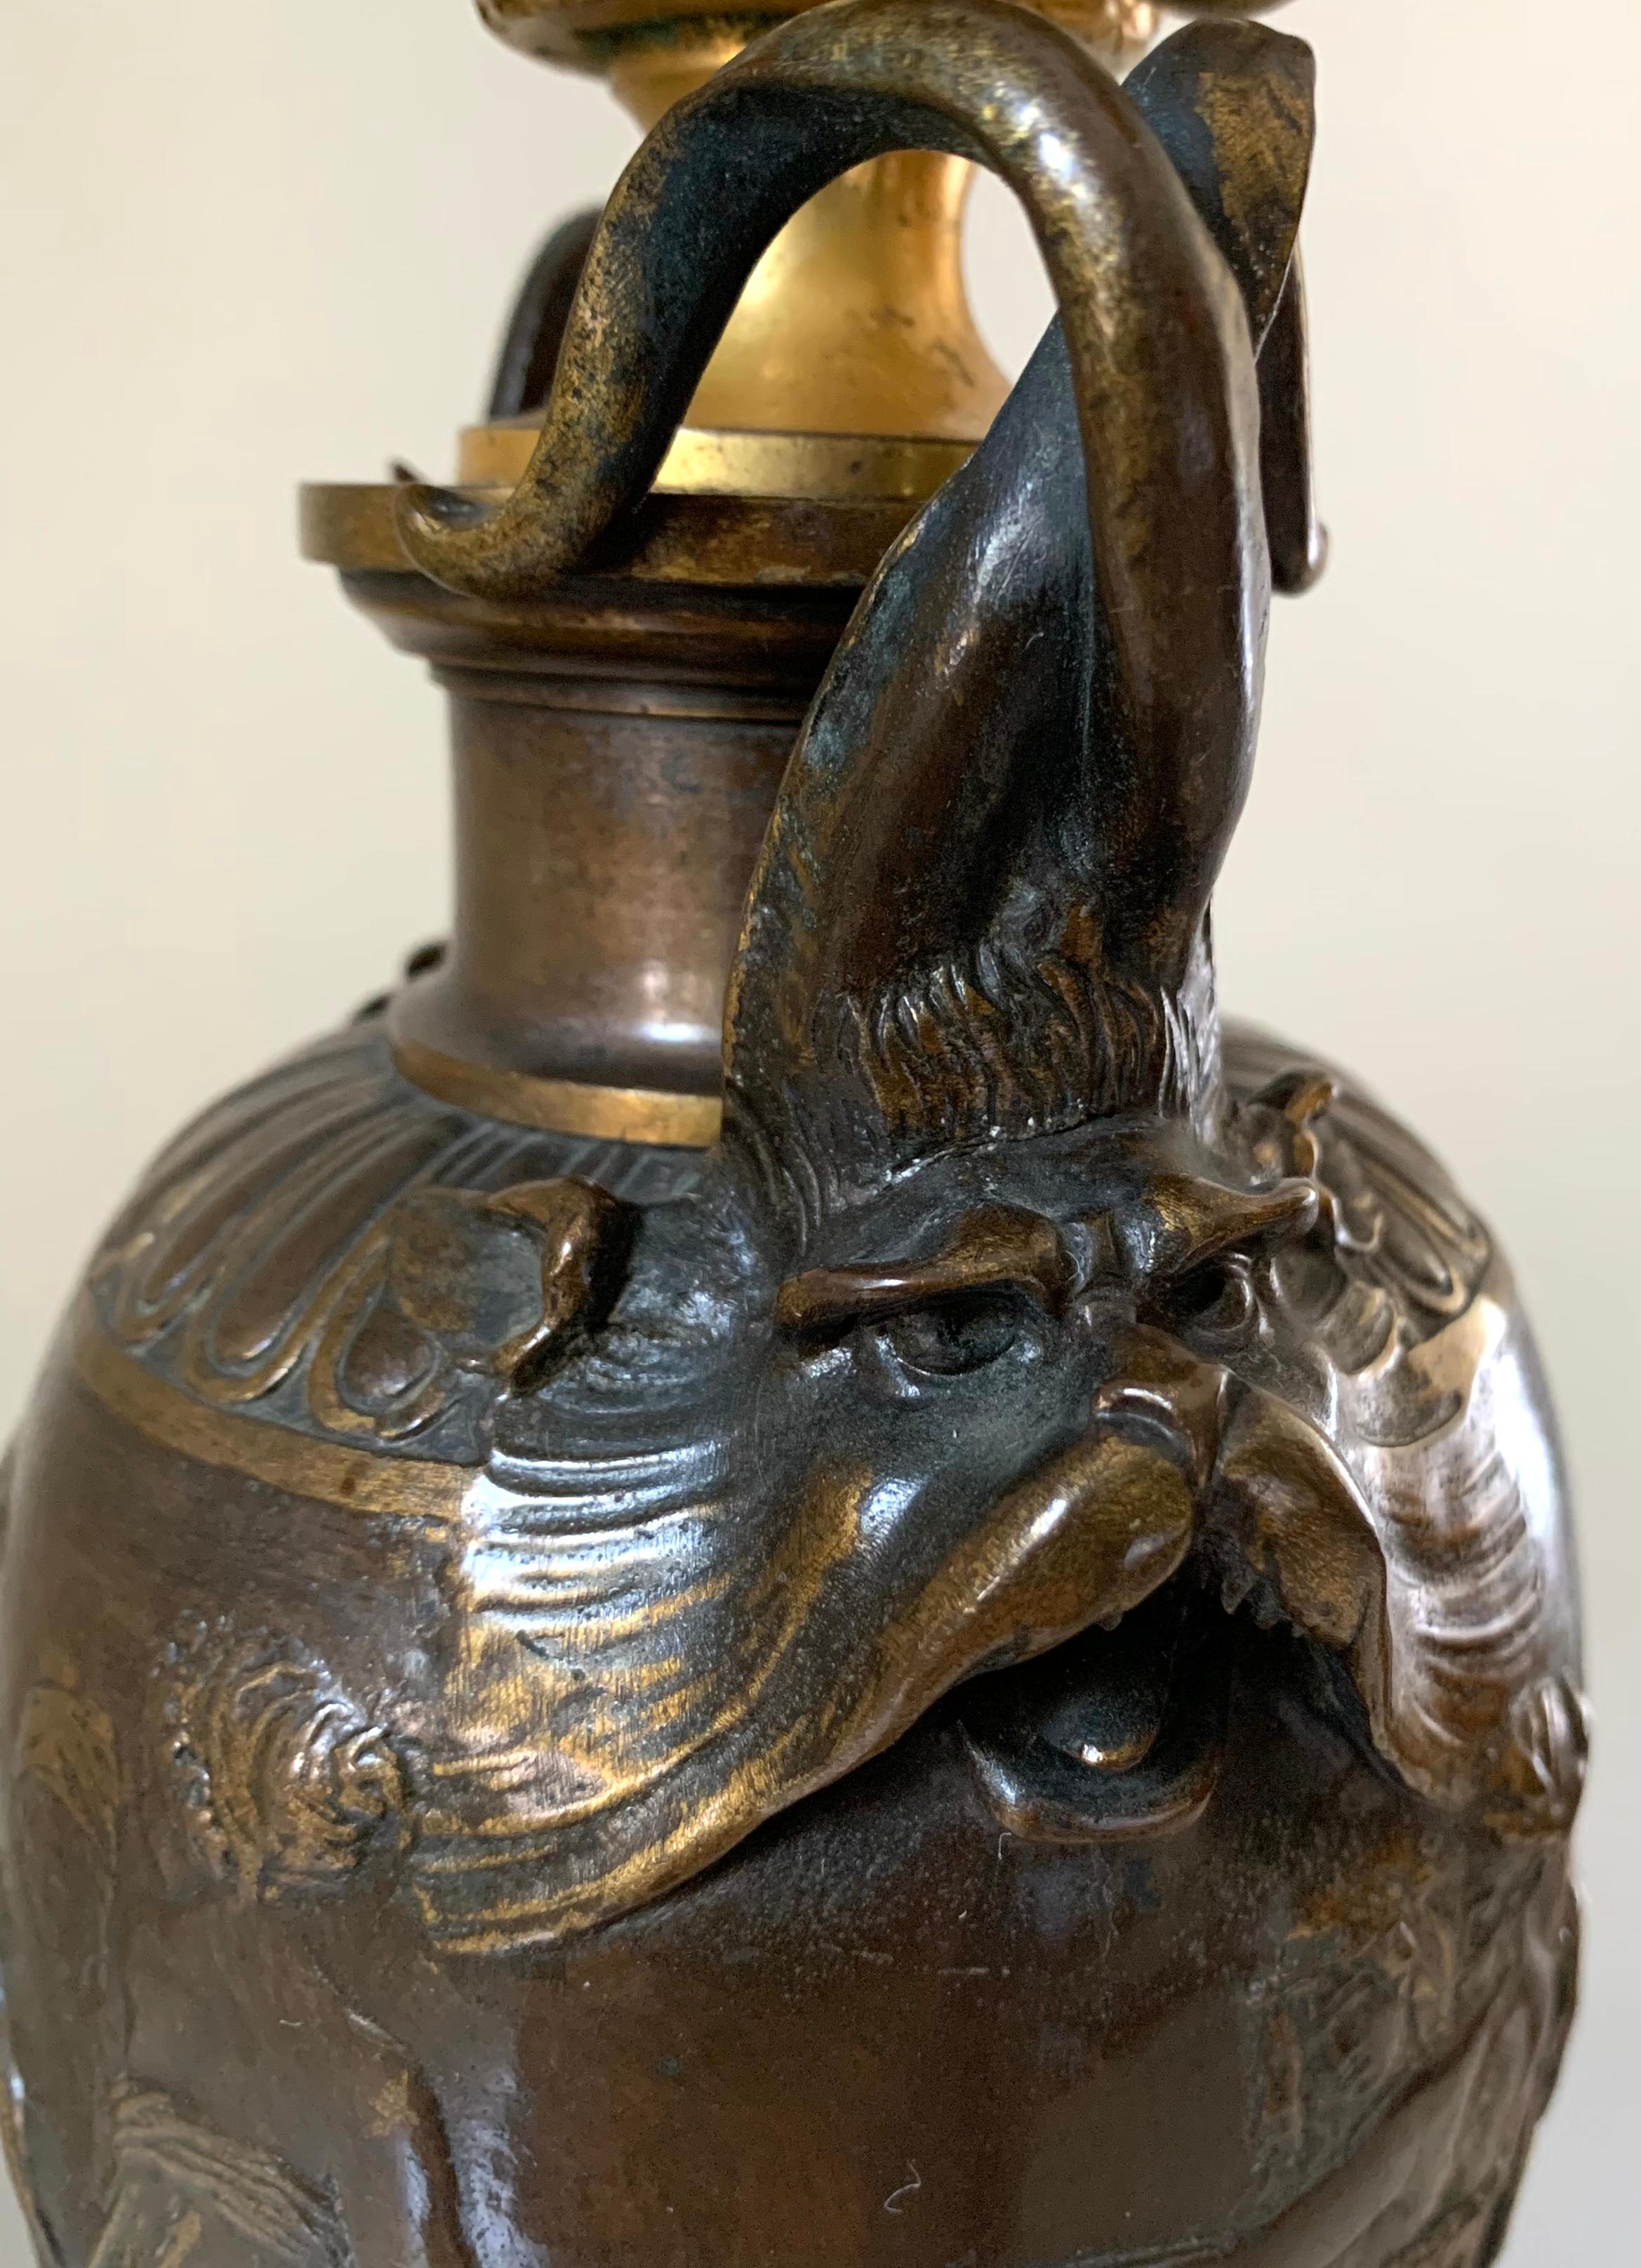 fine antique Napoleon III period signed F. Barbidienne gilt and patinated bronze, carved slate four light lamp with mythological creatures and classical Grecian maidens.
circa 1870
Centered by a superb quality patinated bronze vase with gilded